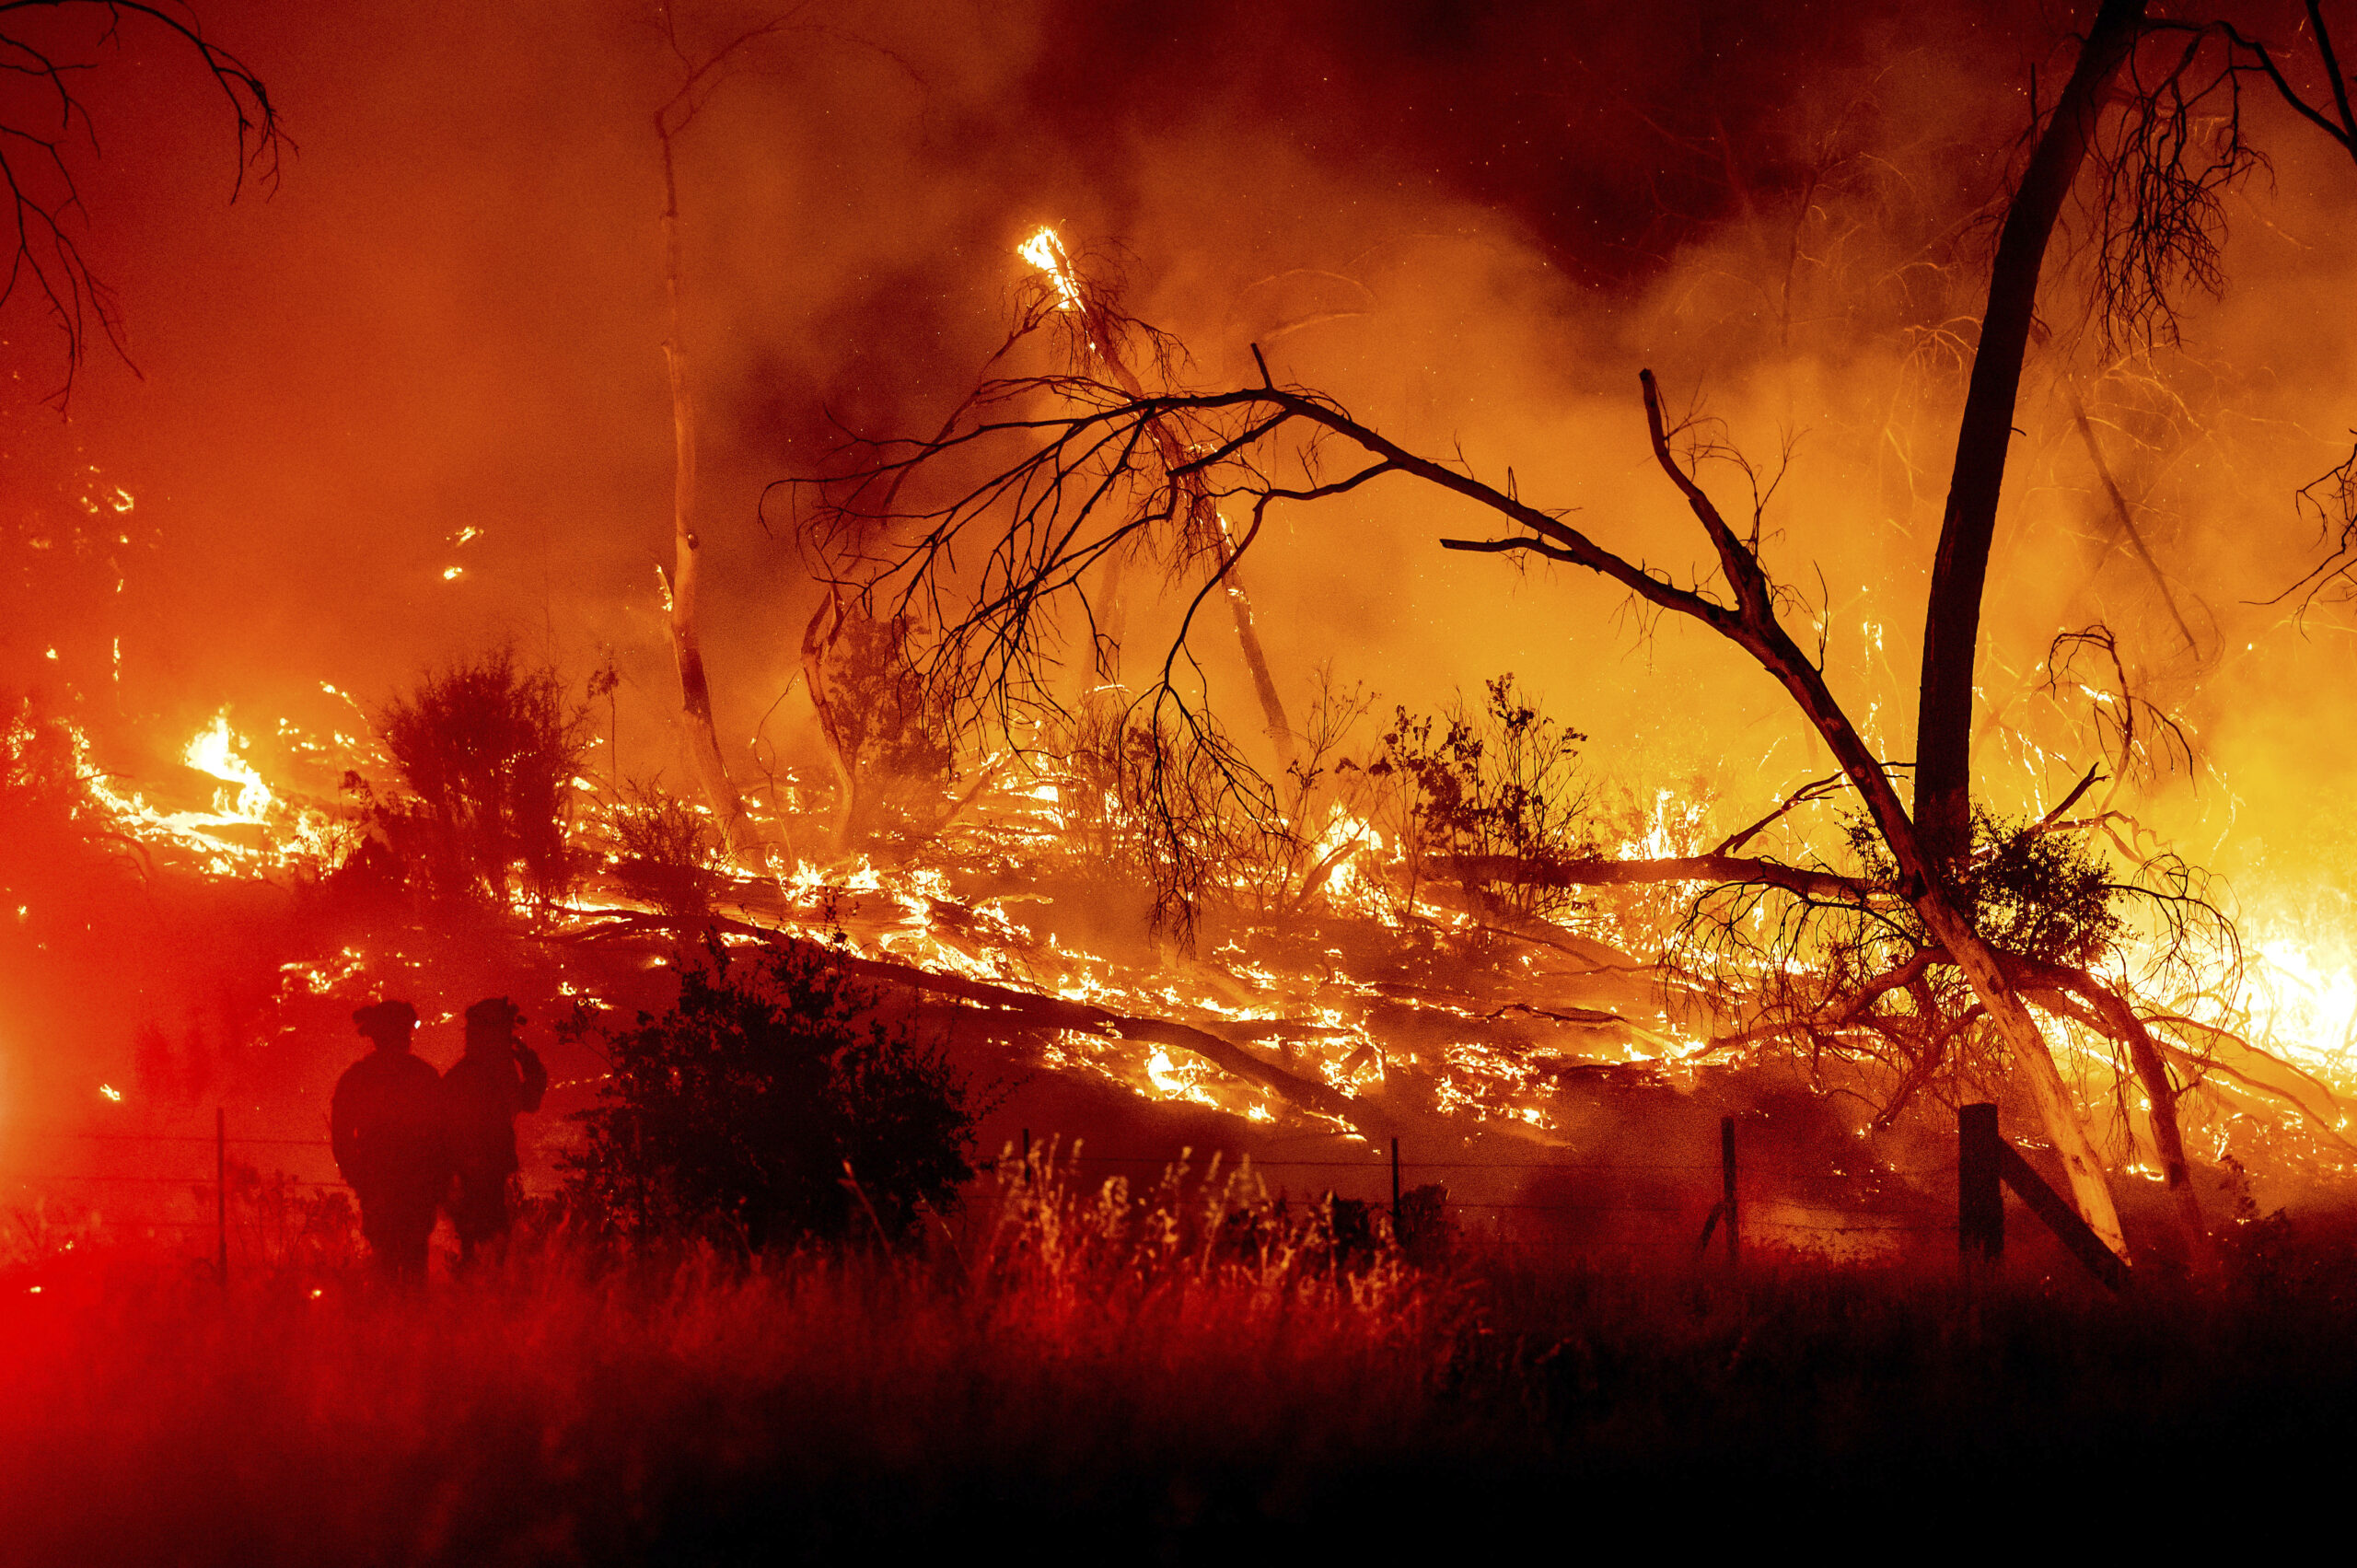 Firefighters battle the Electra Fire in the Rich Gulch community of Calaveras County, Calif., on Monday, July 4, 2022. According to Amador County Sheriff Gary Redman, approximately 100 people sheltered at a Pacific Gas & Electric facility before being evacuated in the evening. (AP Photo/Noah Berger)